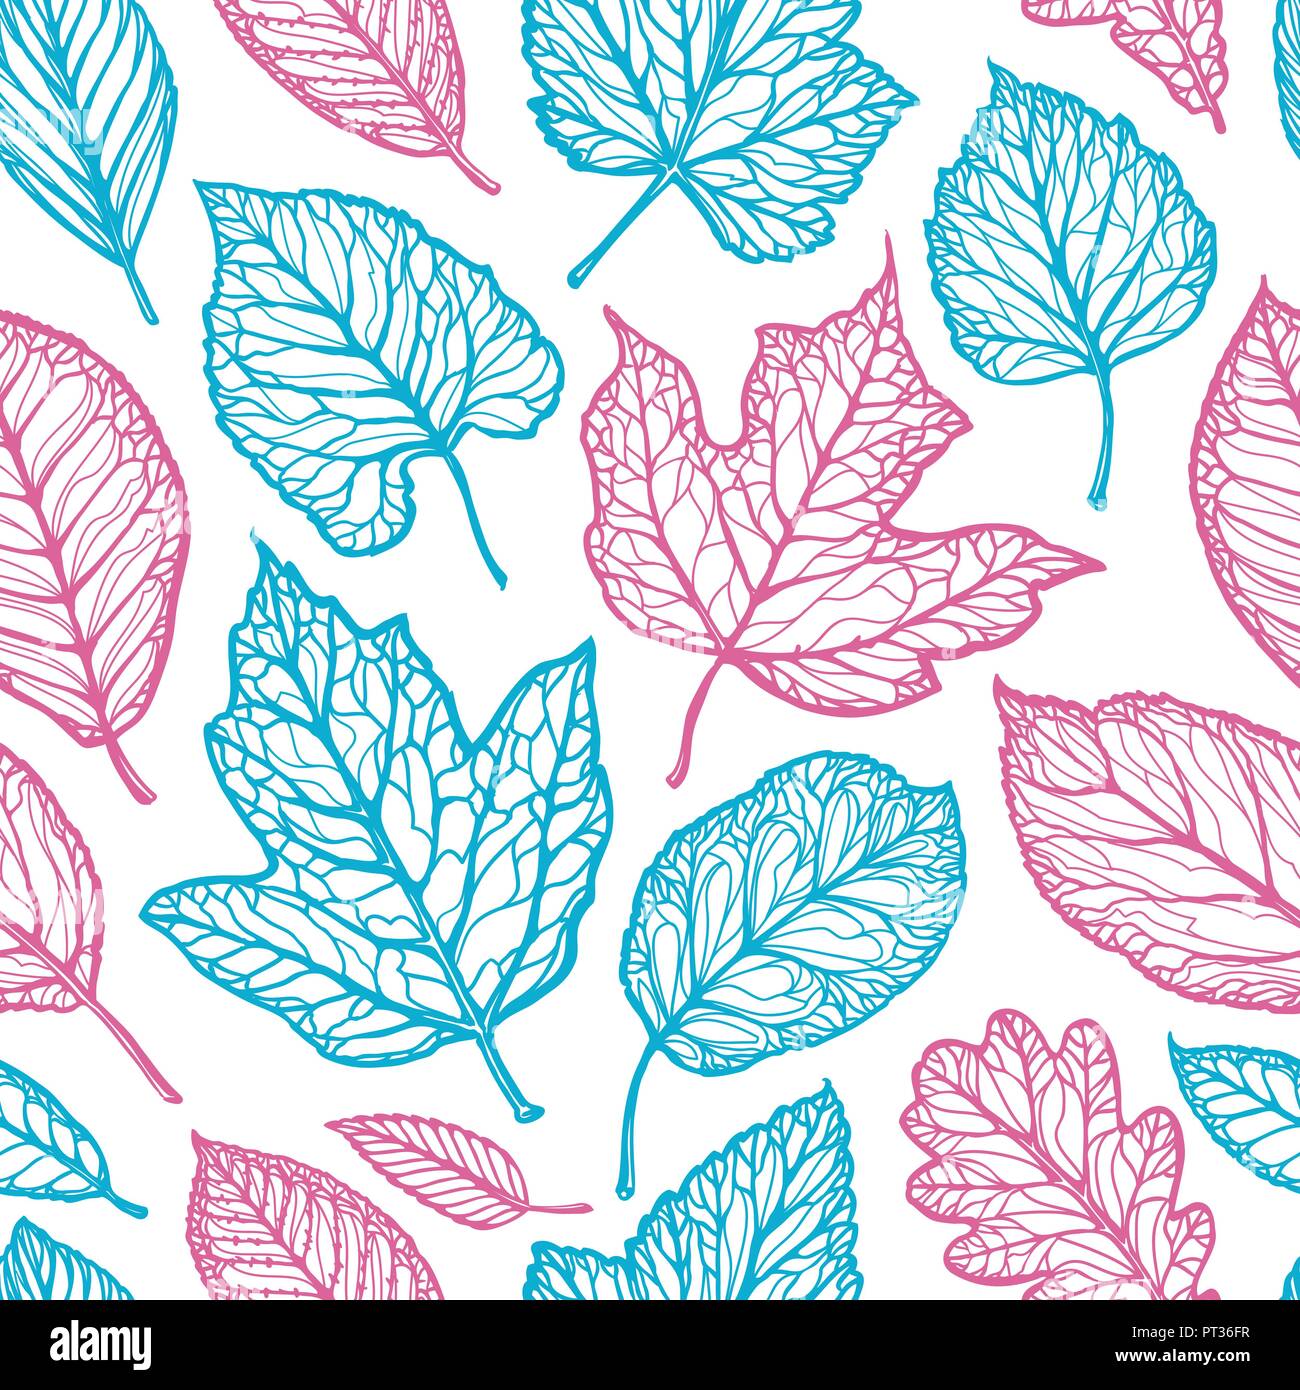 Seamless floral pattern. Leaves, nature backdrop. Decorative background vector illustration Stock Vector